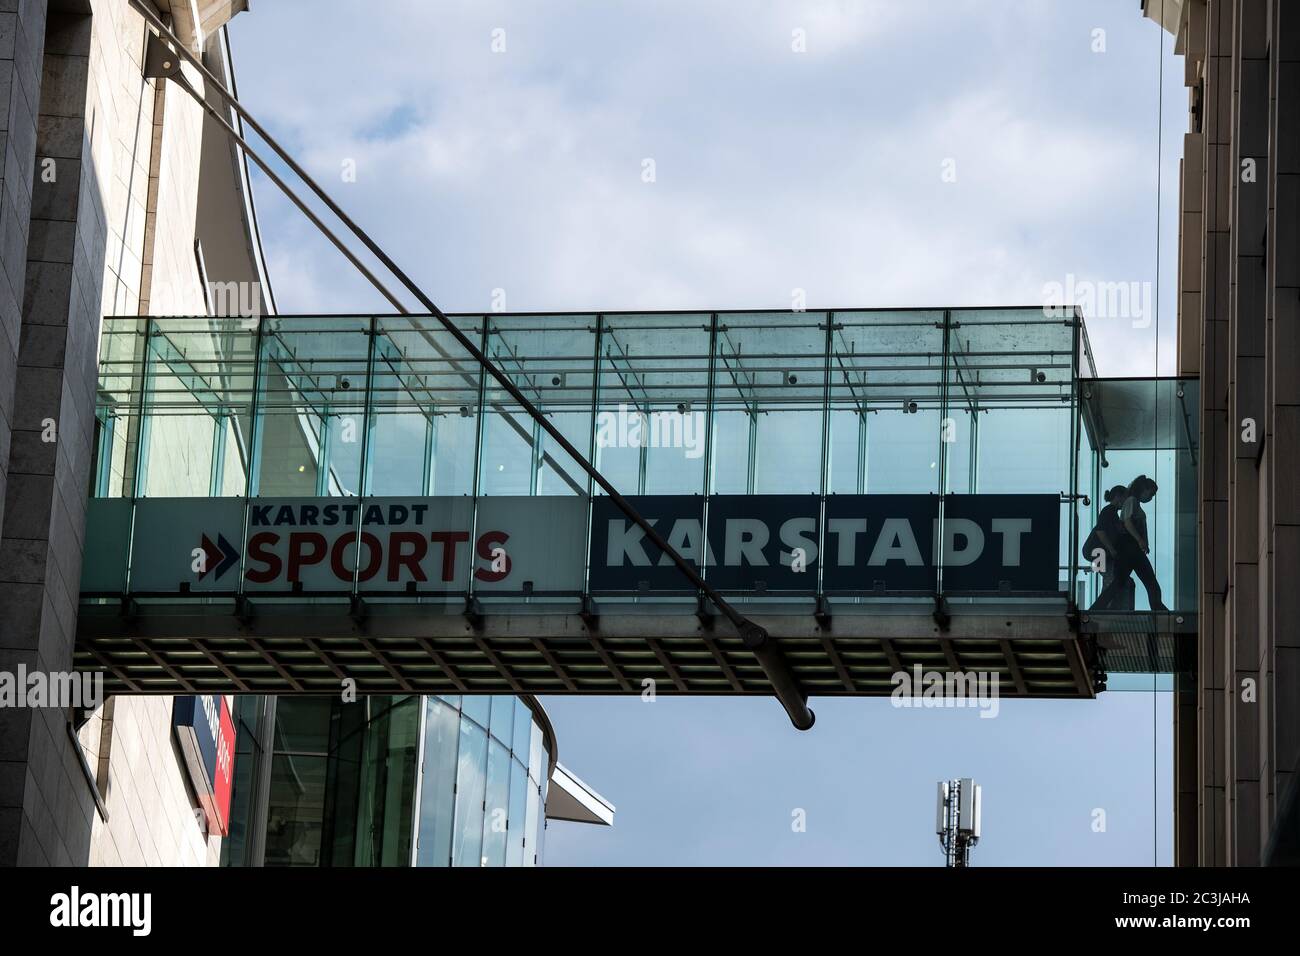 Dortmund, Germany. 20th June, 2020. Two women walk across a glass bridge, which is a branch of Karstadt and Karstadt Sports. In addition to the planned closure of dozens of branches of the department store chain Galeria Karstadt Kaufhof, 20 of the 30 branches of the Karstadt Sports subsidiary are also to be closed. Credit: Bernd Thissen/dpa/Alamy Live News Stock Photo